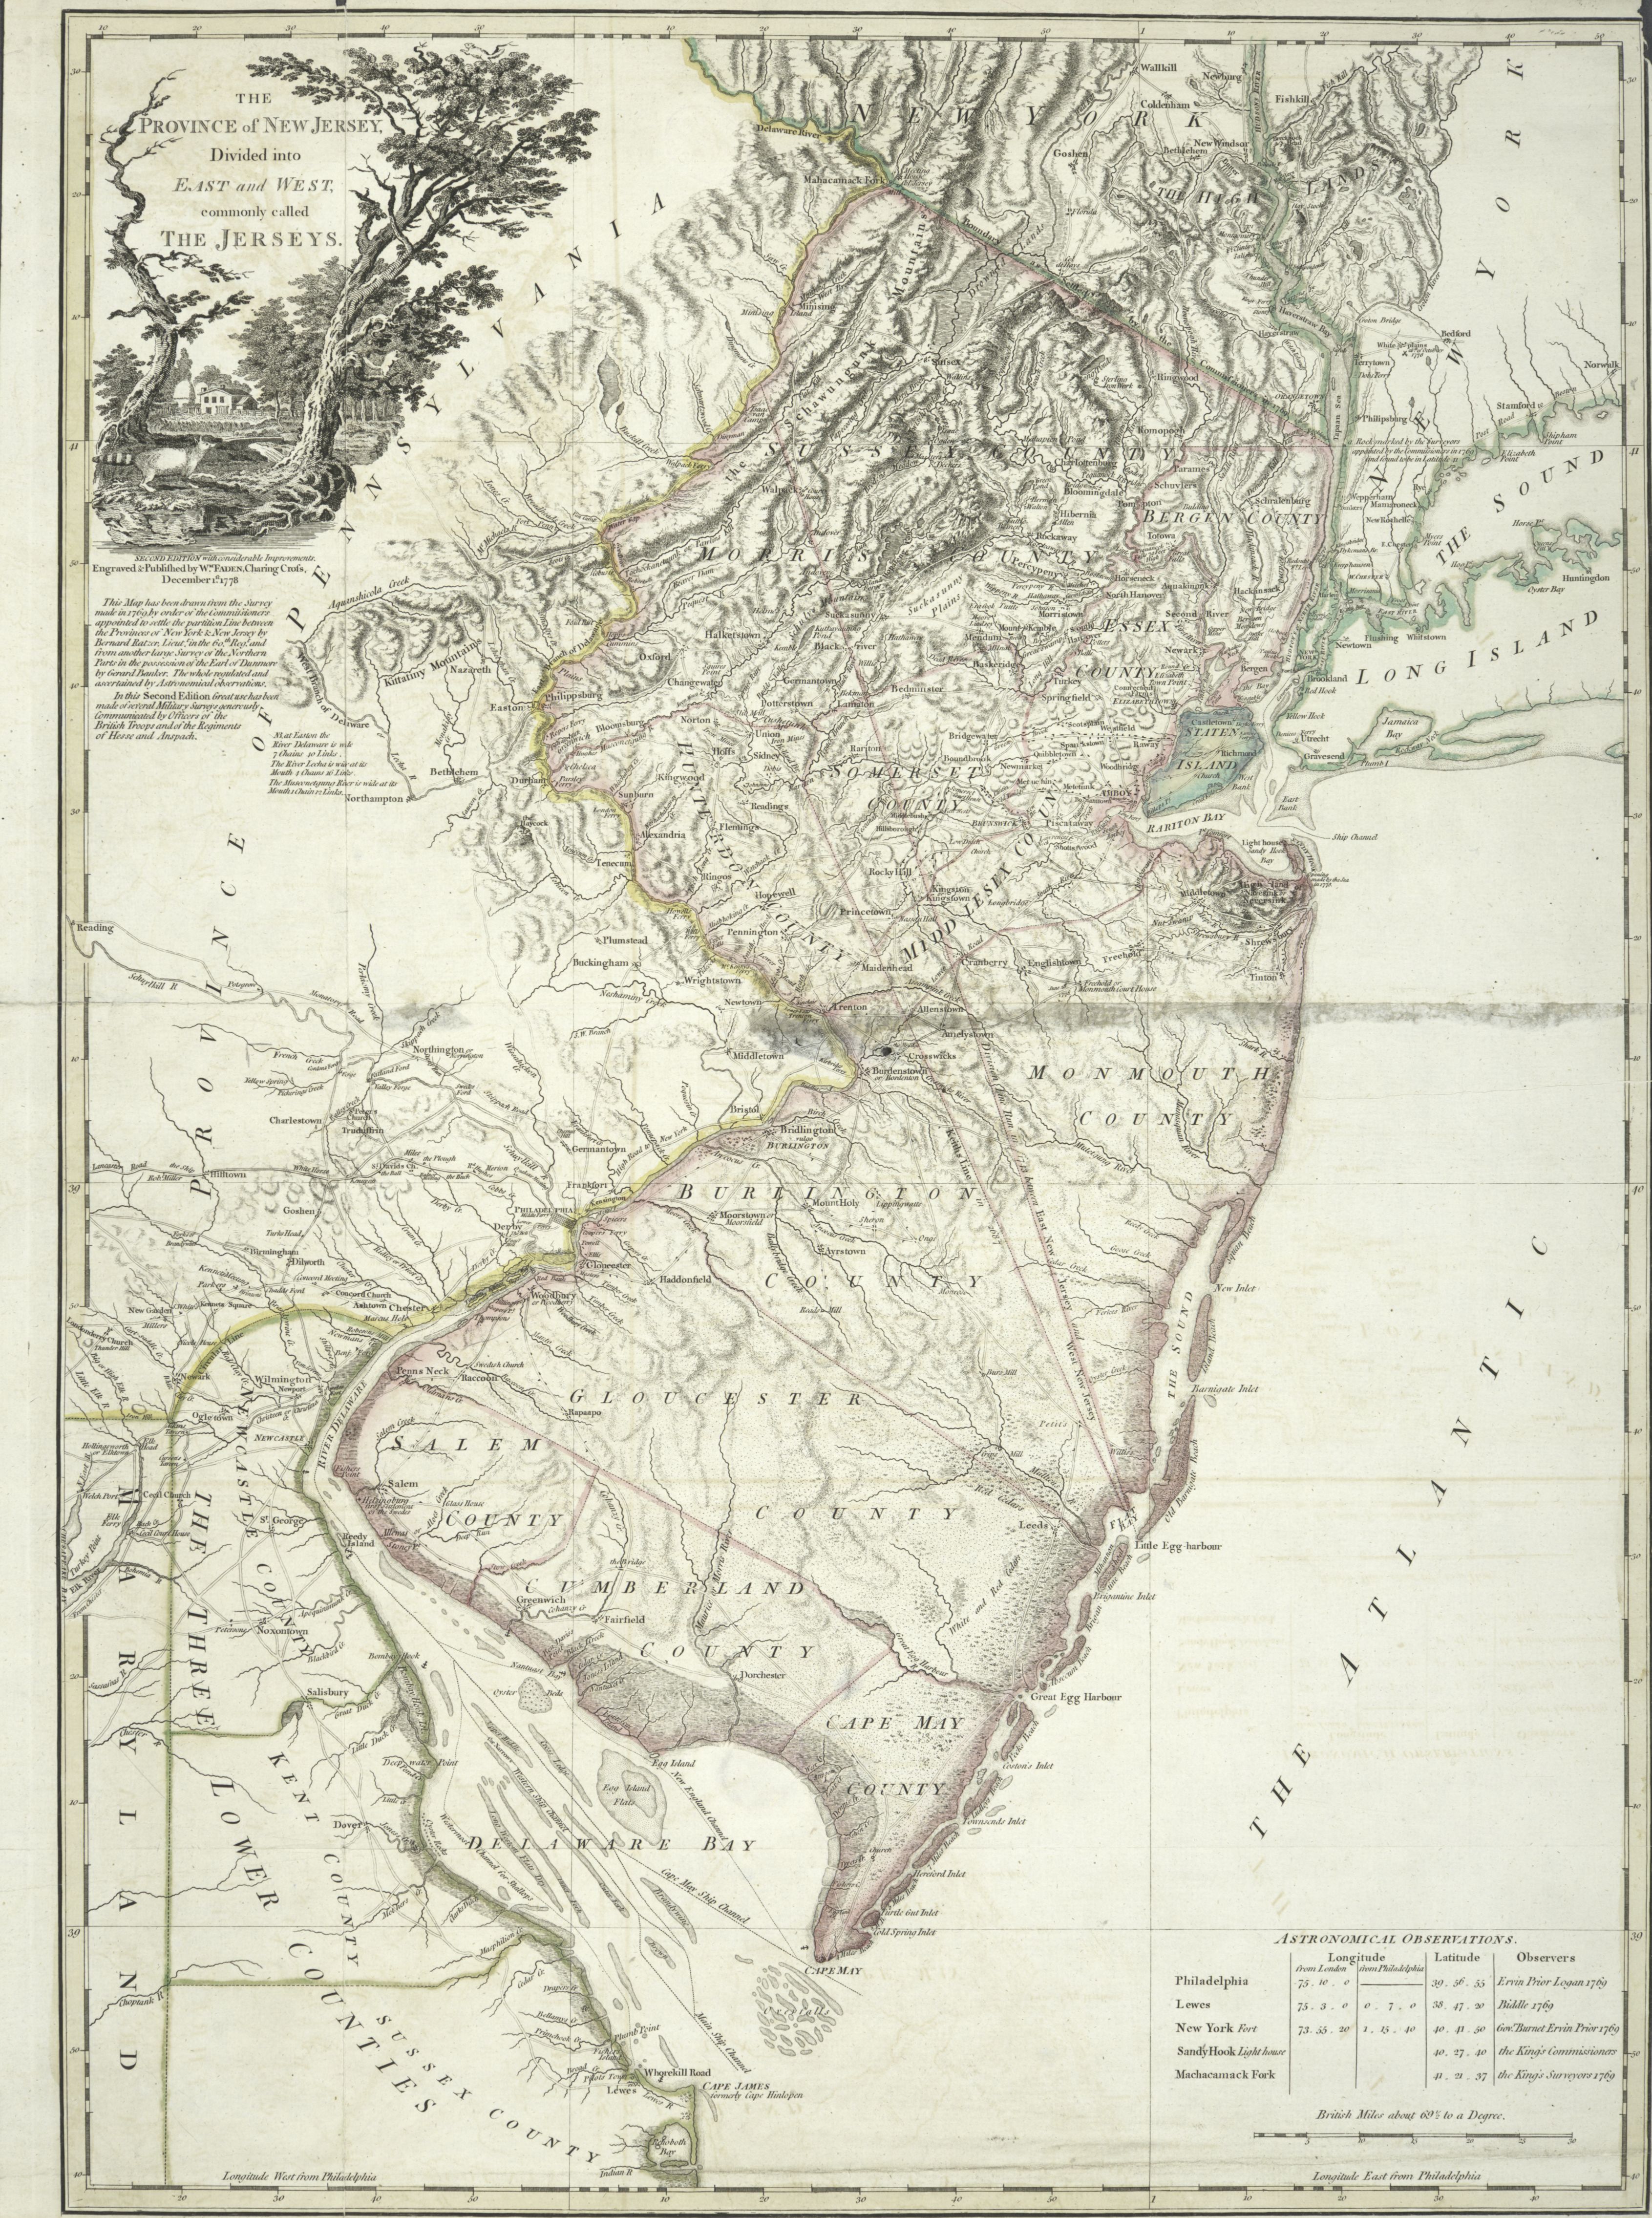 William Faden's 1778 map "The Province of New Jersey"